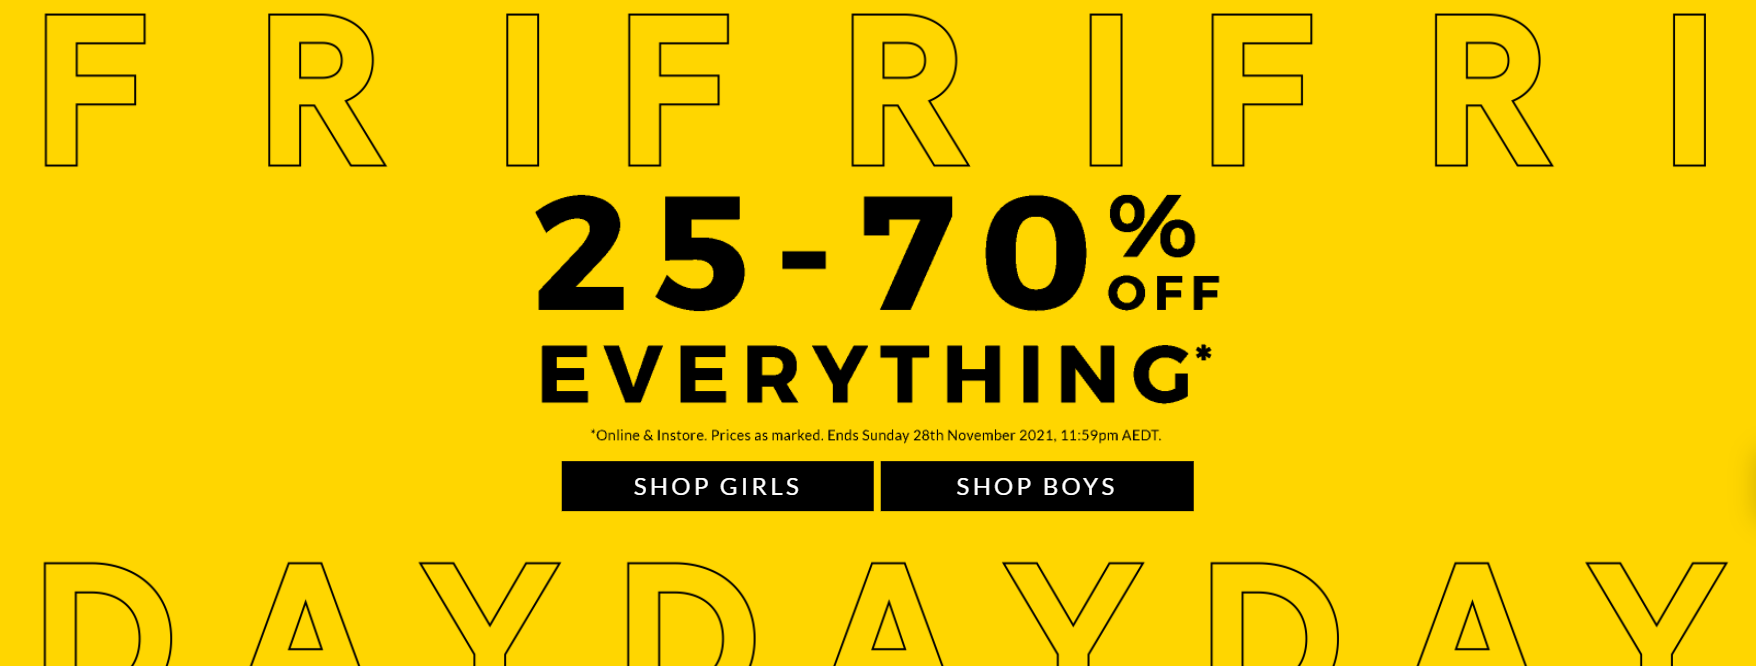 Clarks Black Friday sale 25-75% OFF everything including heels, flats, boots & more